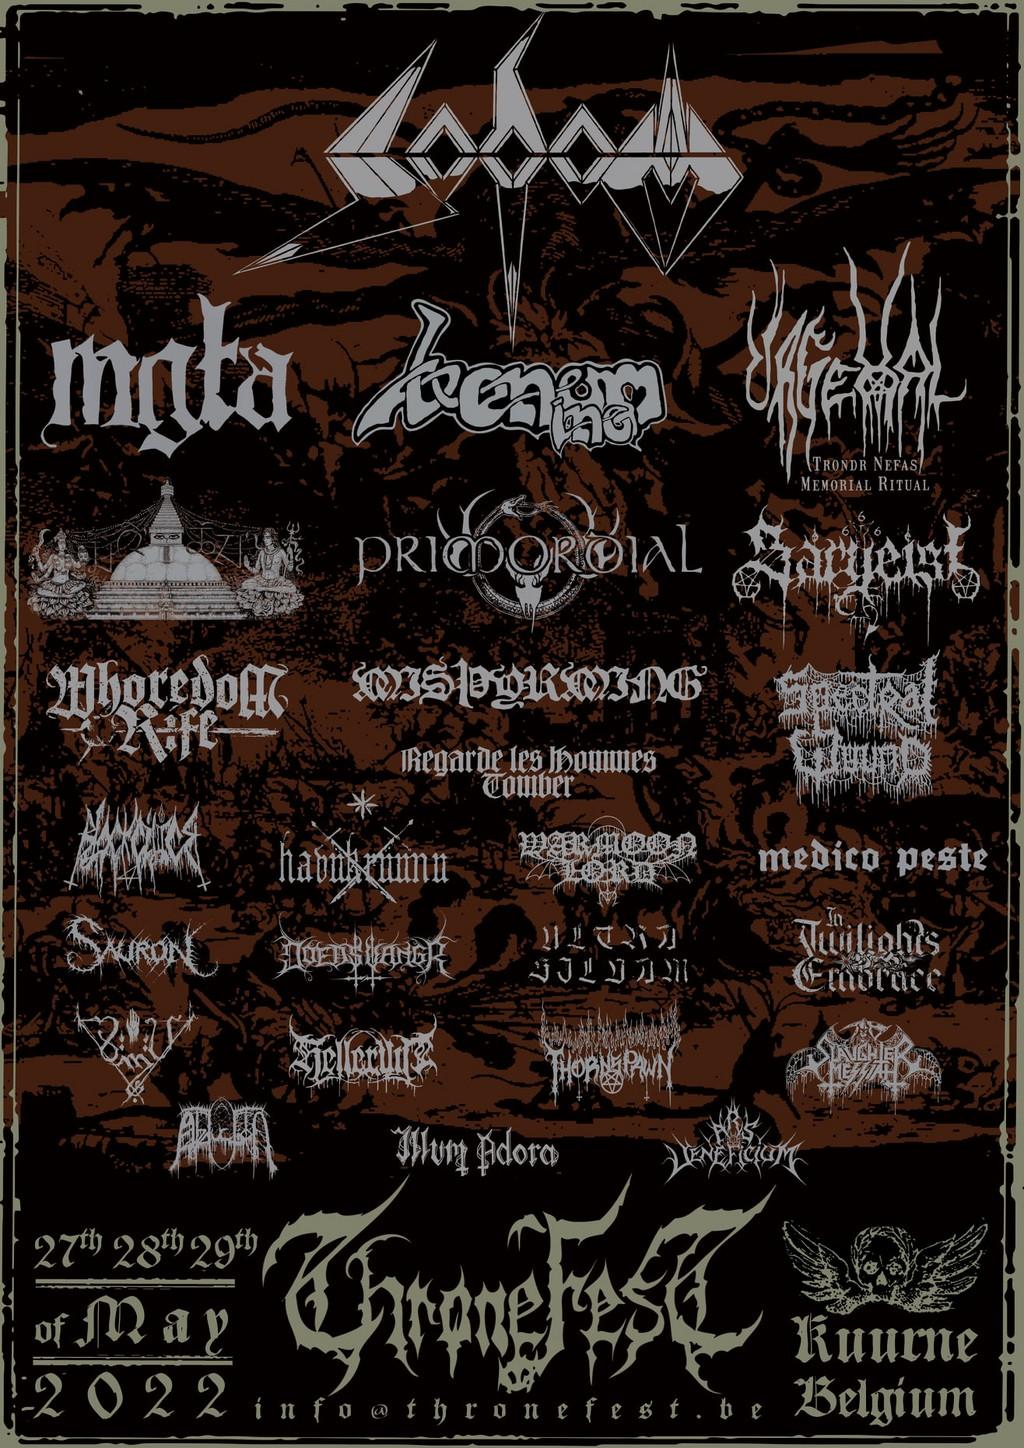 Lineup Poster Throne Fest 2022